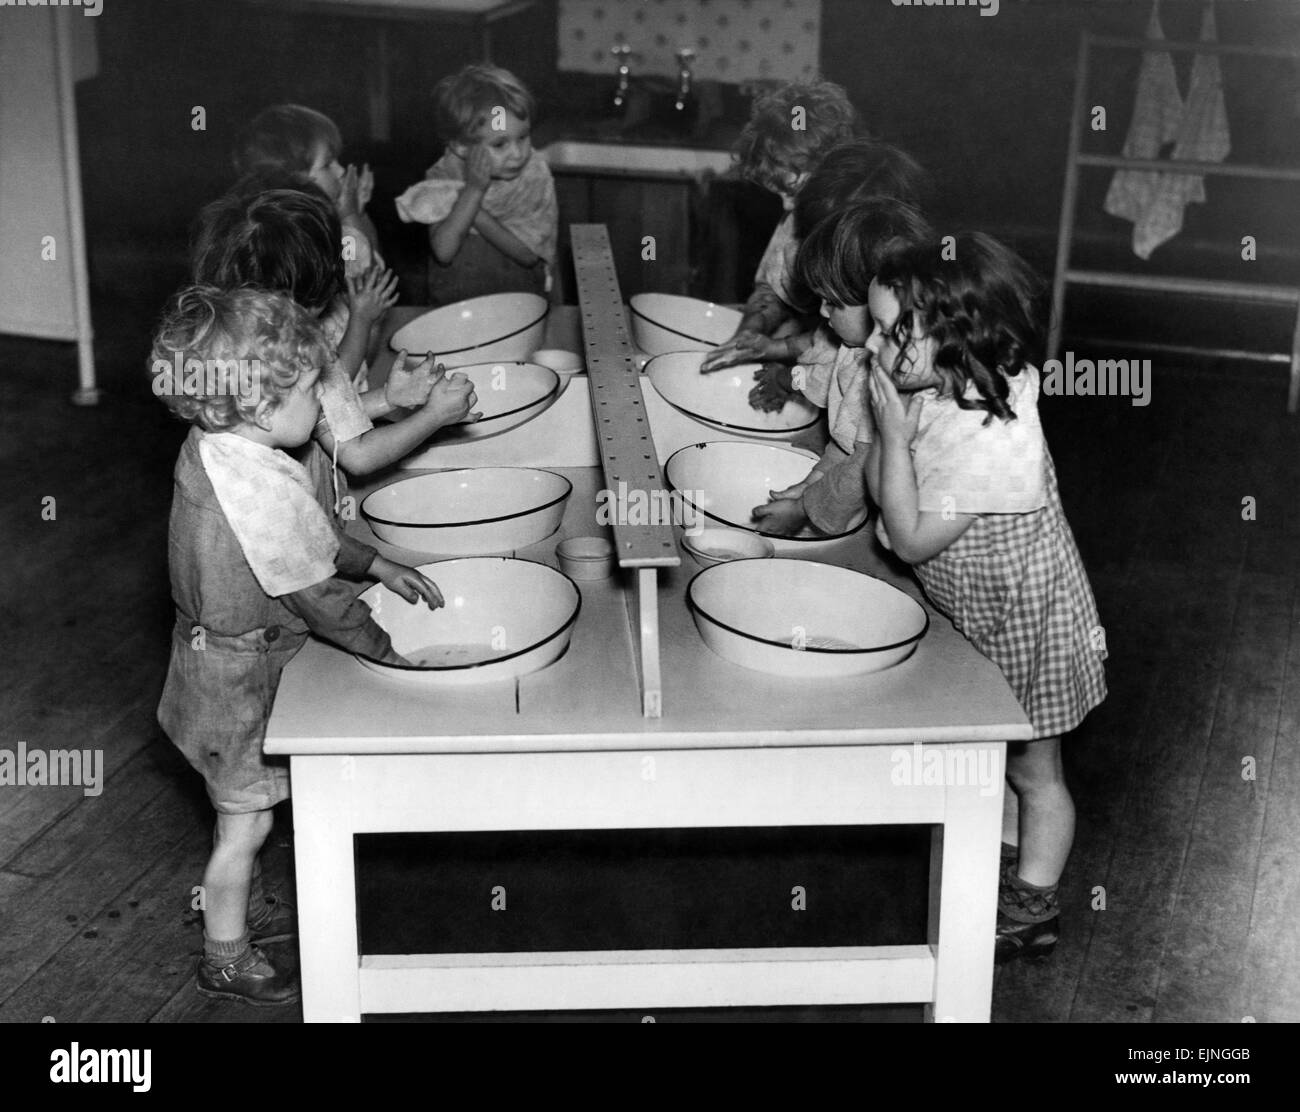 Young children washing themselves in enamal basins during World War Two. November 1943 Stock Photo